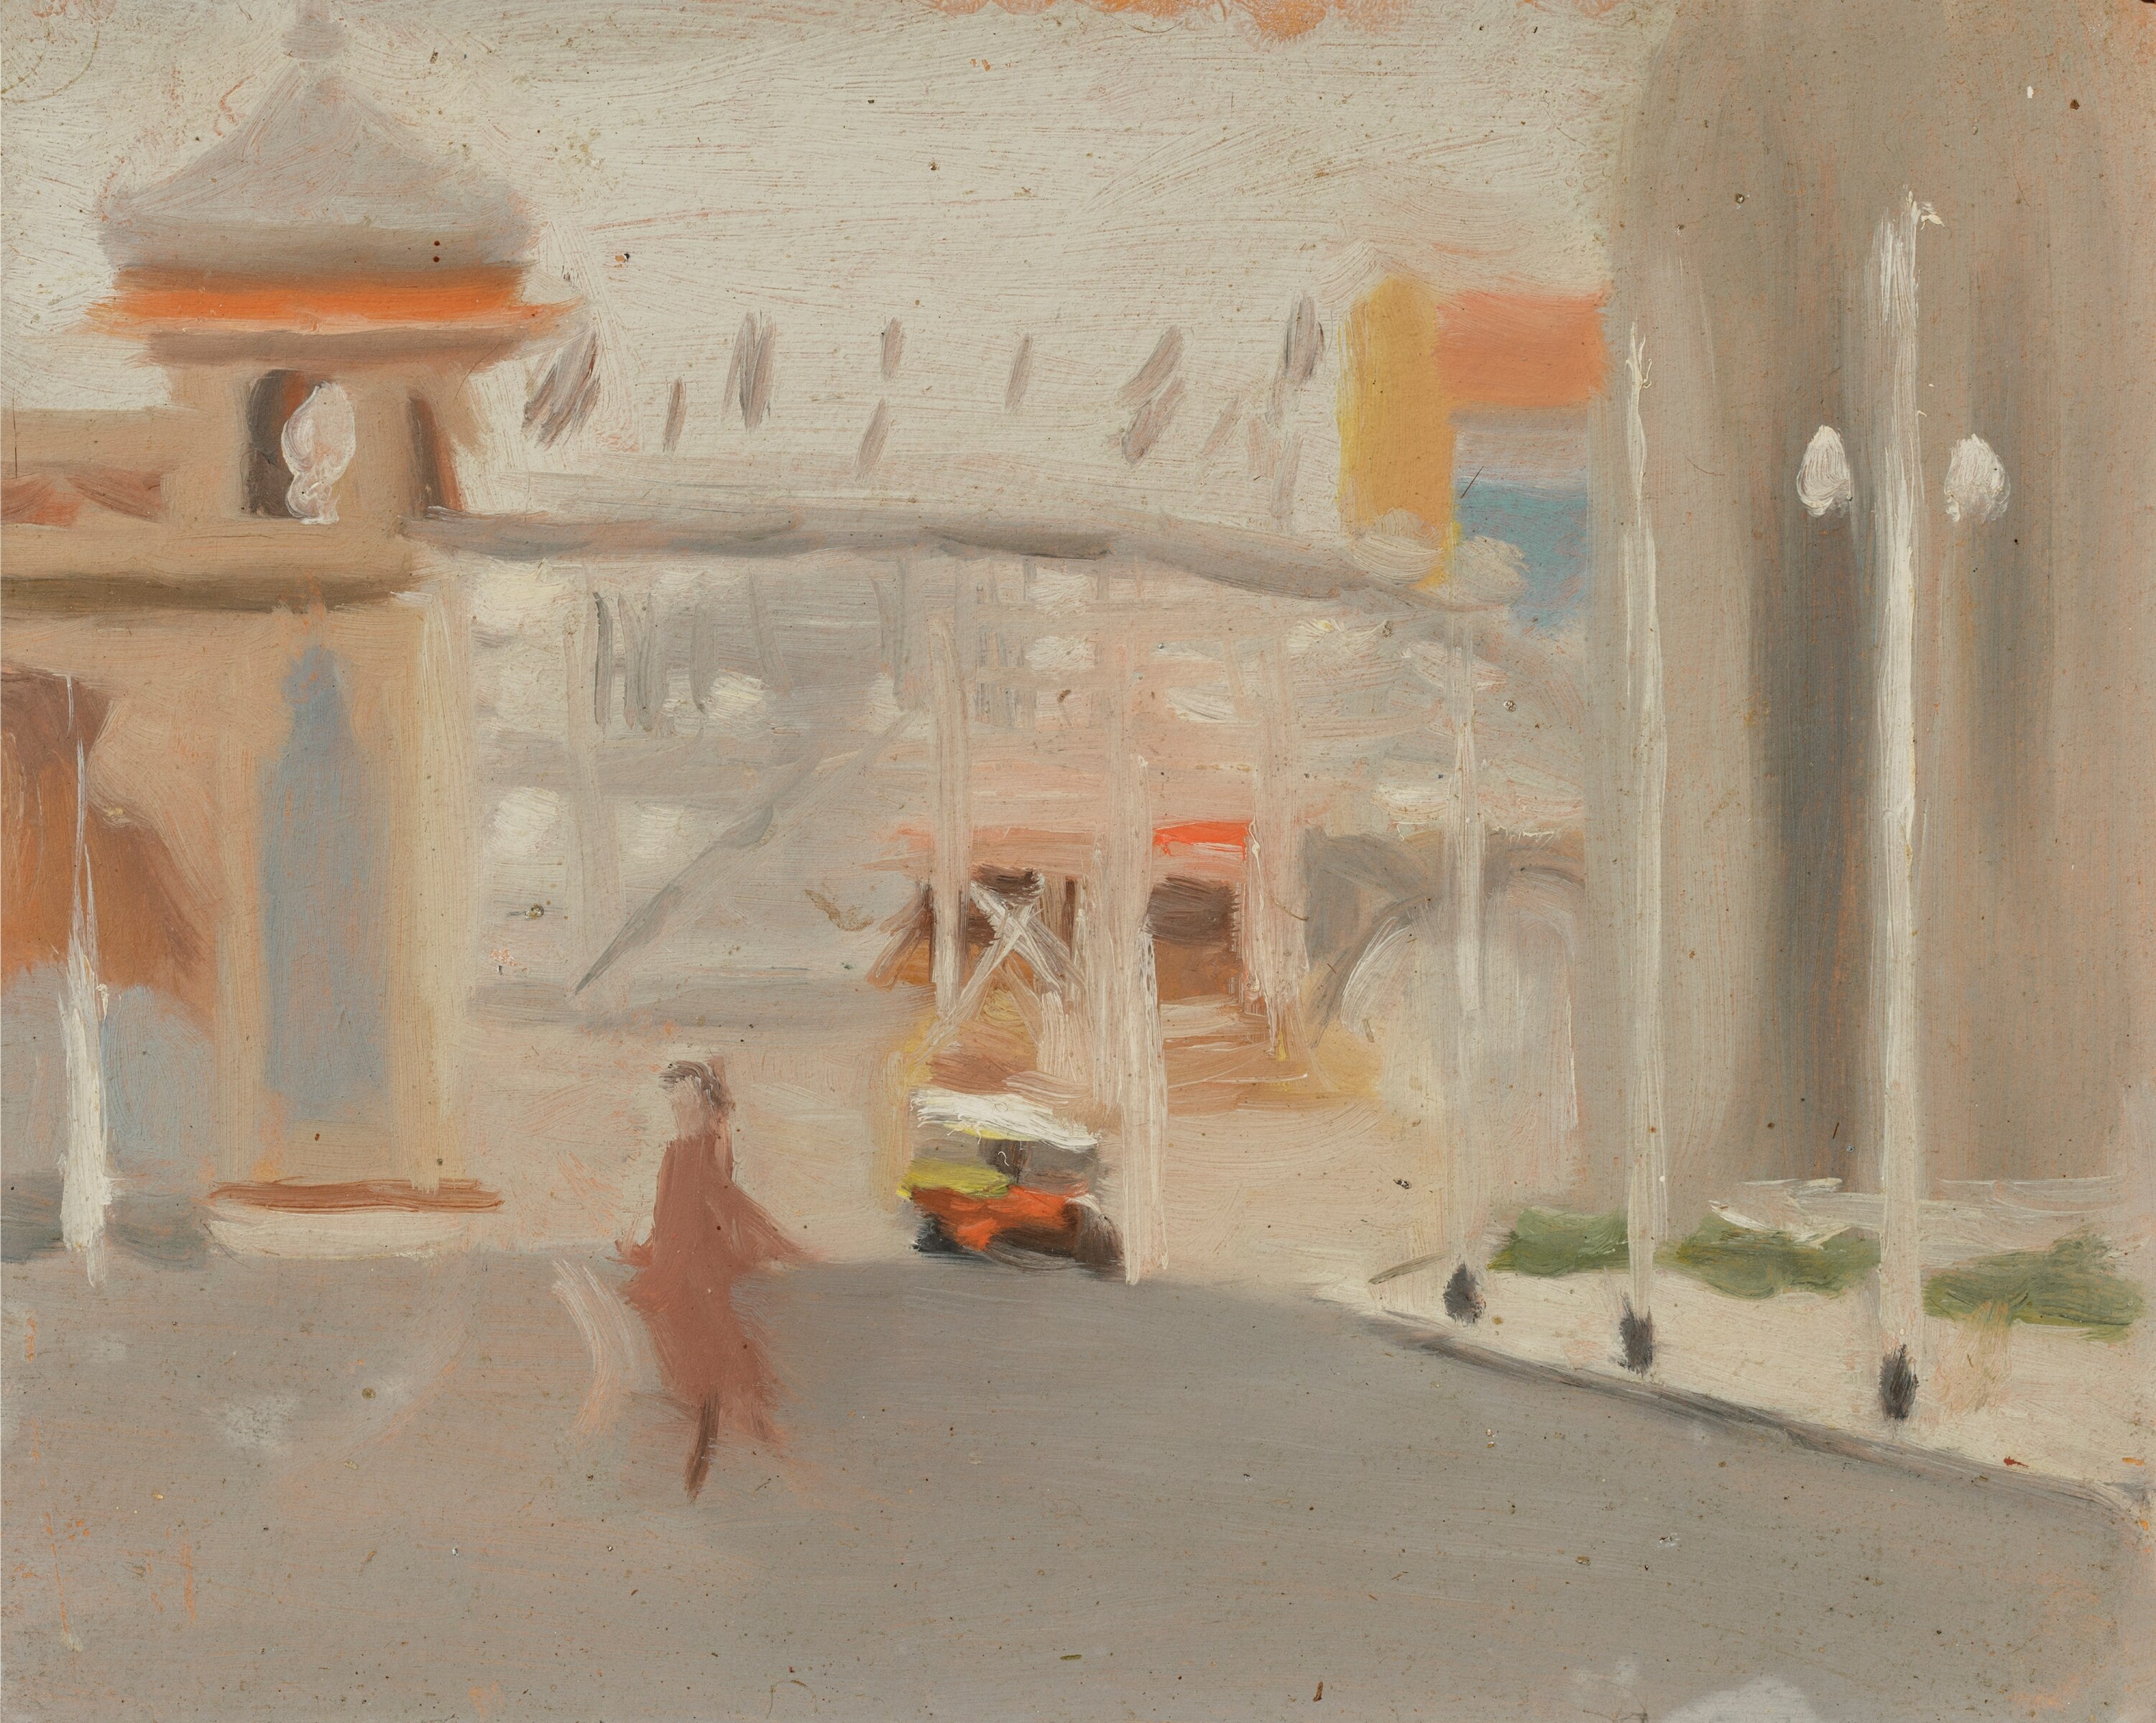 A painting by Clarice Beckett, blurry realism, of the outside of Melbourne's Luna Park in 1919